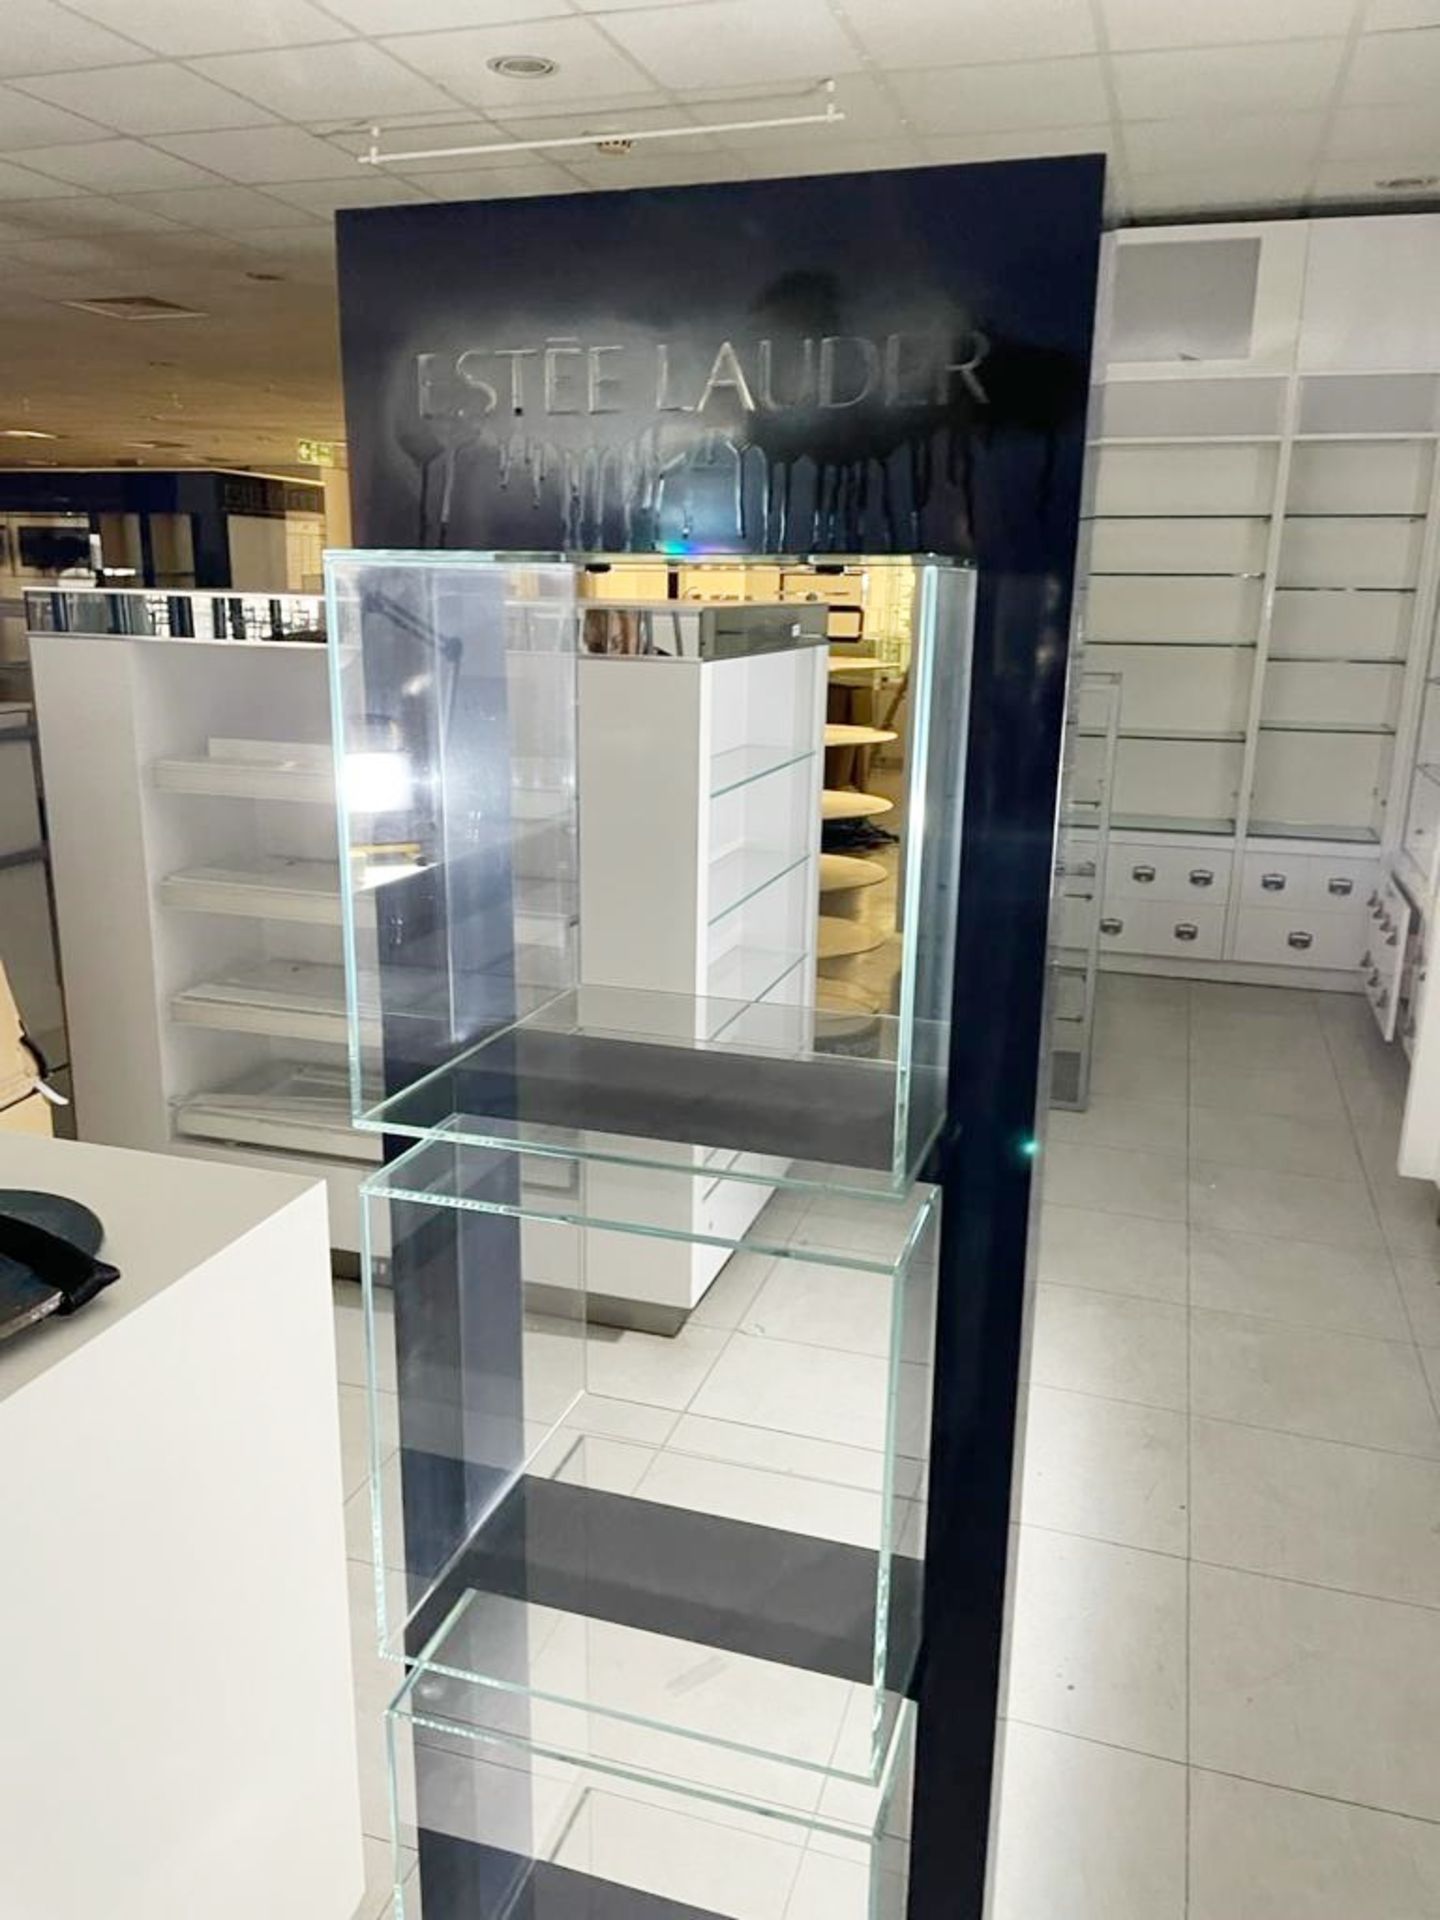 1 x Estee Lauder Free Standing Retail Display Unit With Glass Cube Display Shelves - Size H175 x W49 - Image 7 of 8